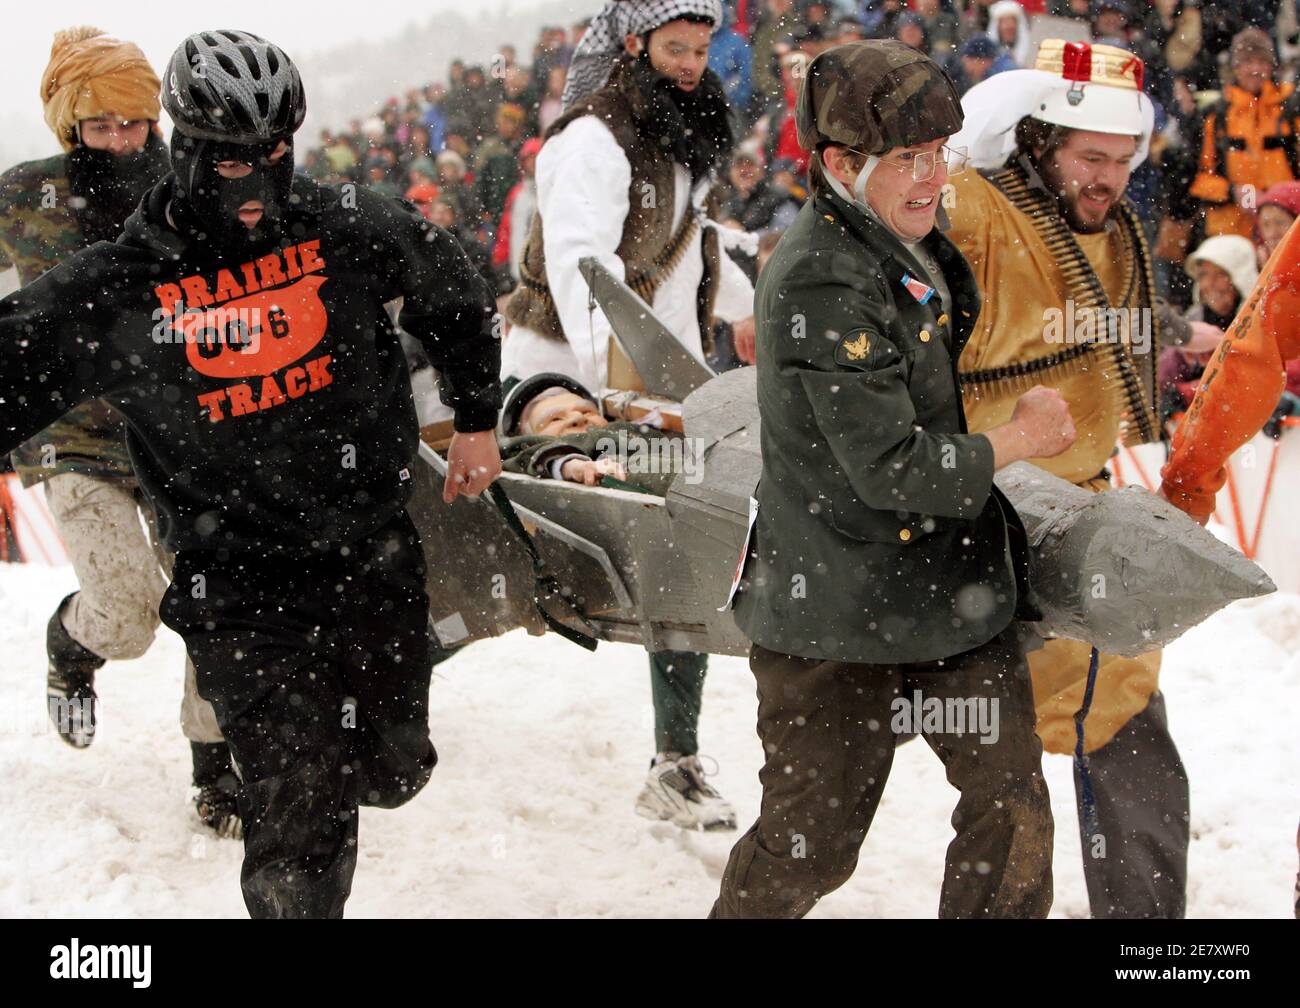 Participants in the coffin races run during the "Frozen Dead Guy Days"  festival in Nederland, Colorado March 10, 2007. "Frozen Dead Guy Days"  commemorates Norwegian Bredo Morstoel who died in 1989 and